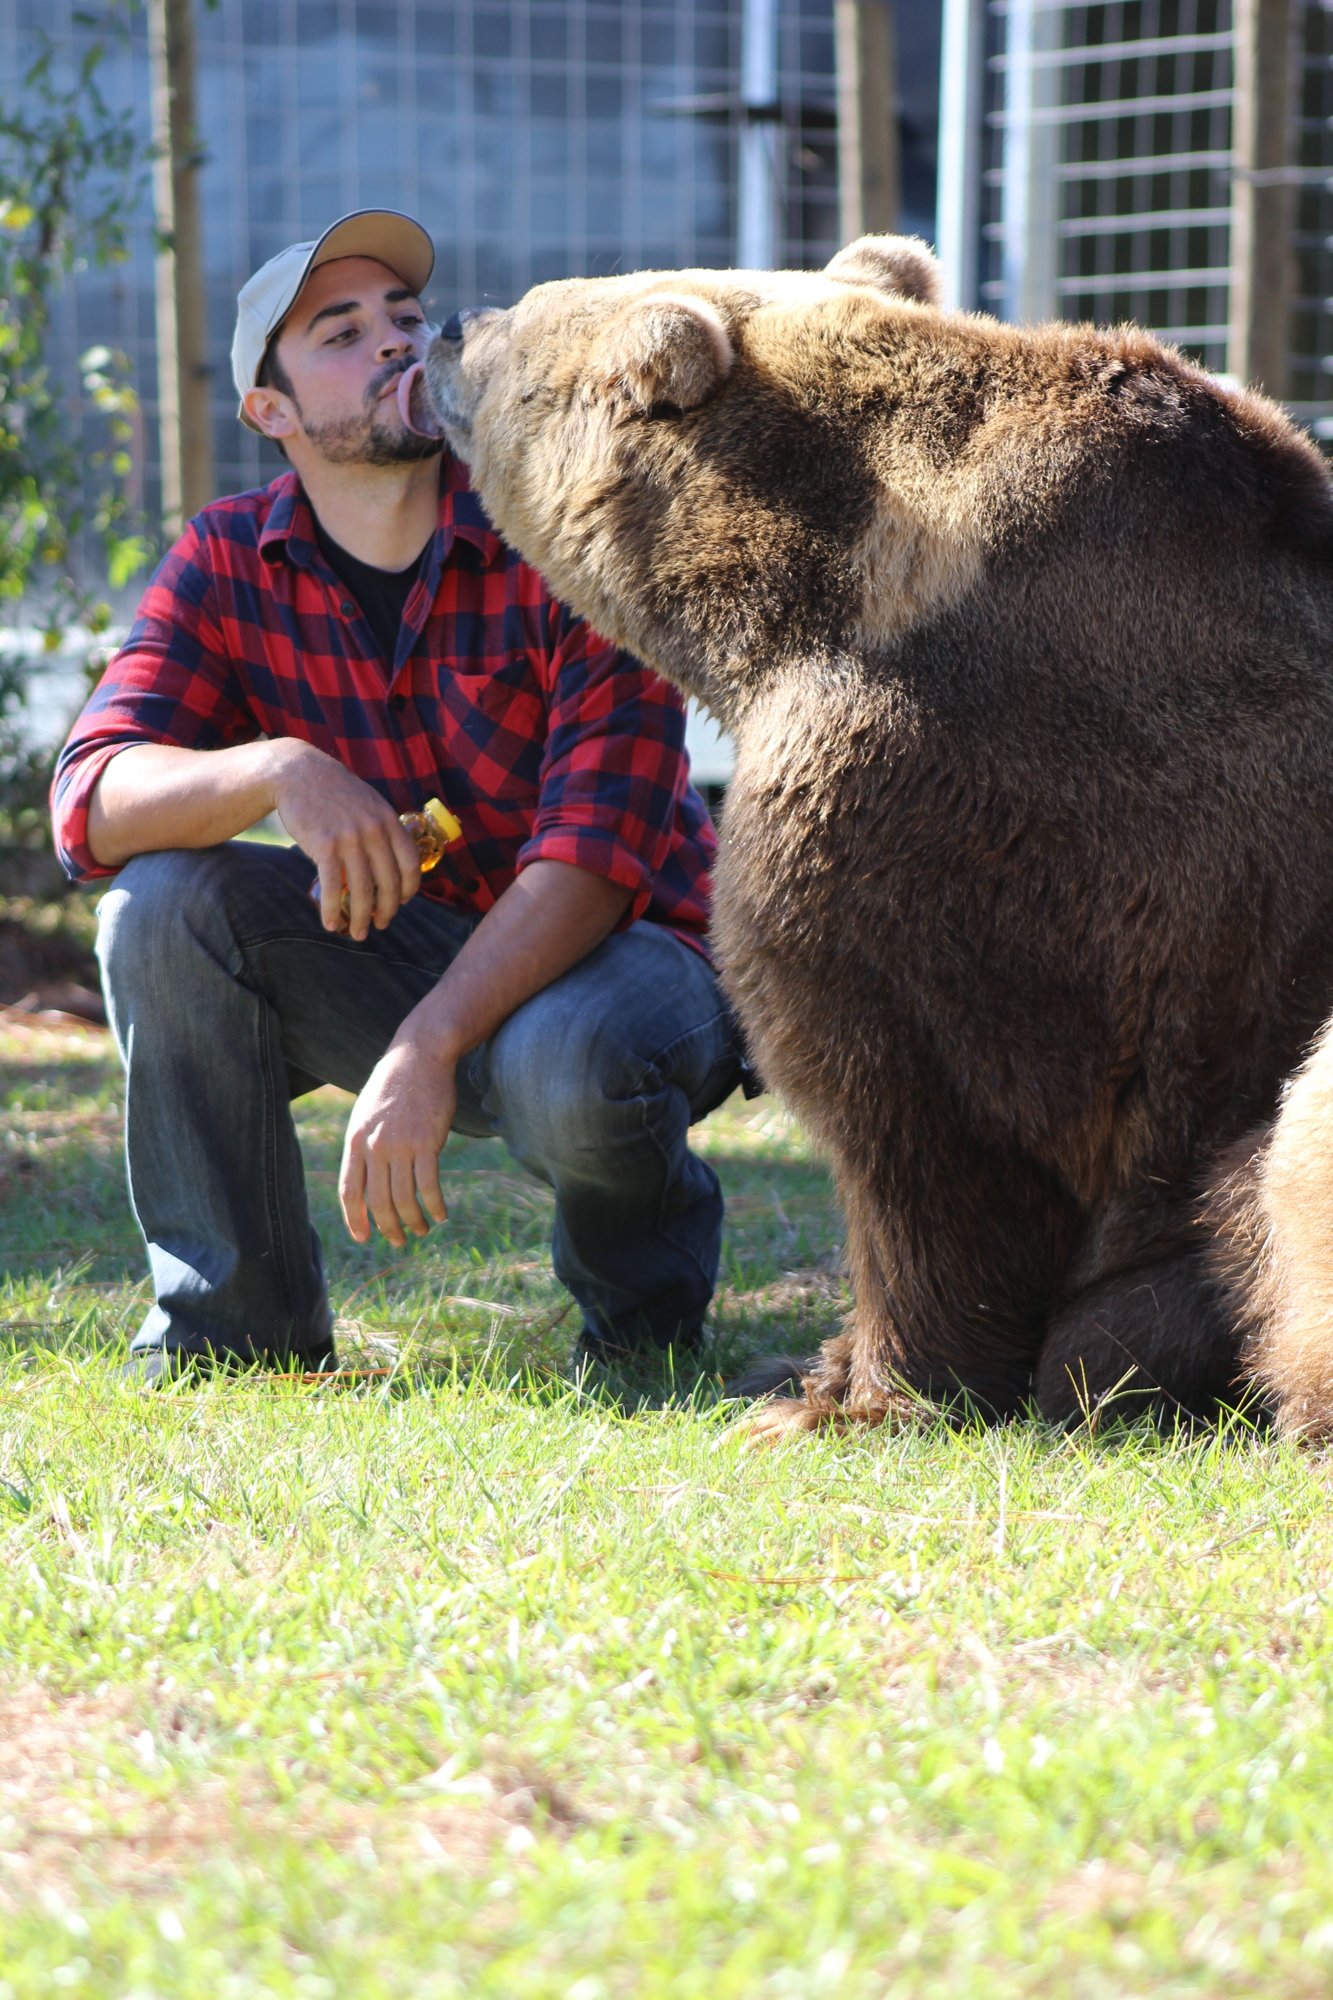 Johnny Welde Jr. plays with one of Bearadise Ranch's European Bears during Brunch with the Bears.